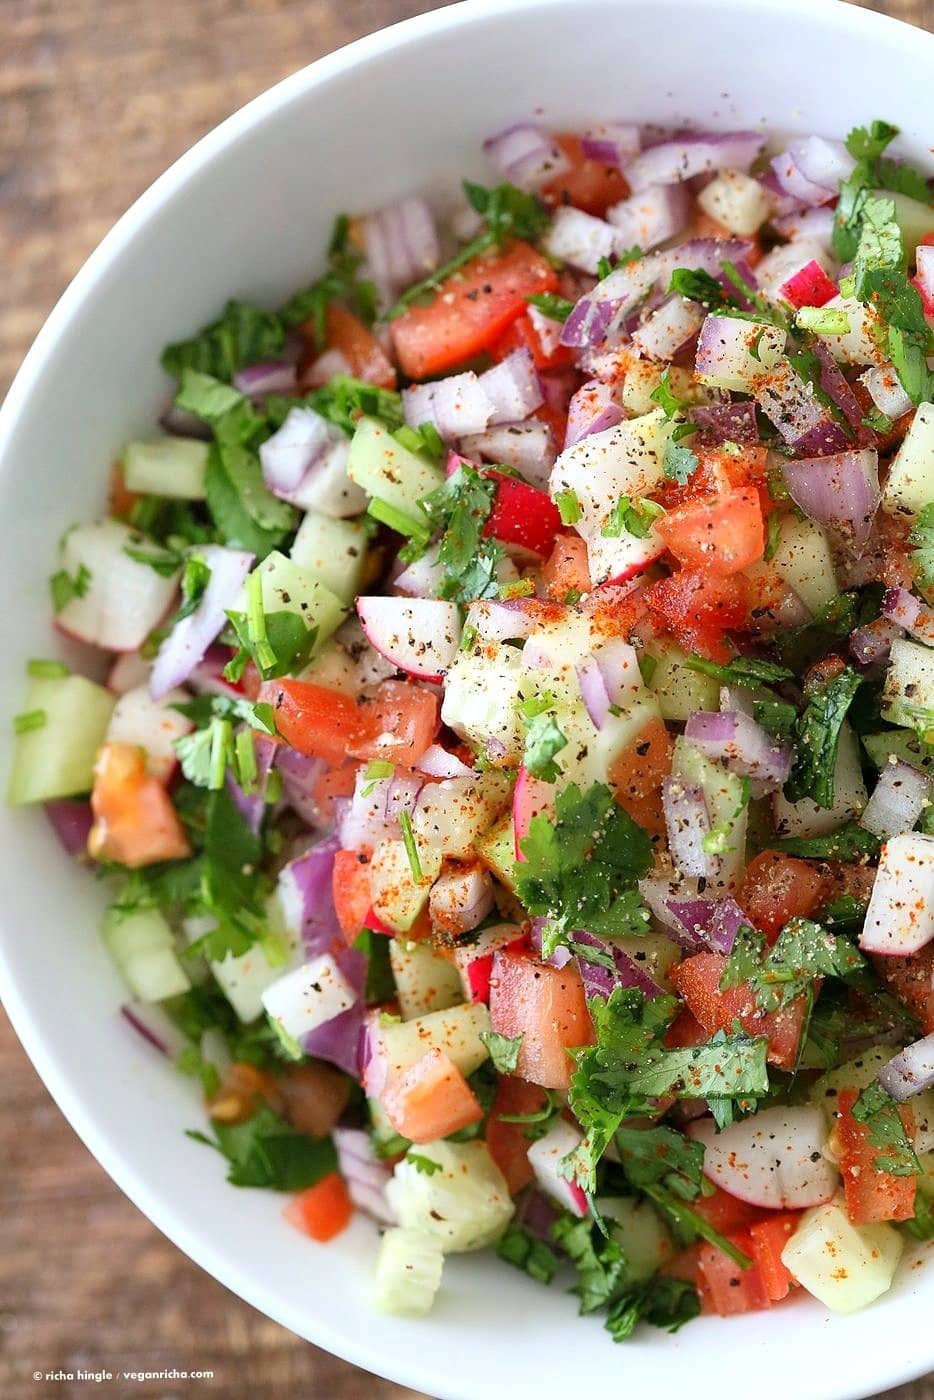 Kachumber salad made with chopped cucumber, tomato, and onion.